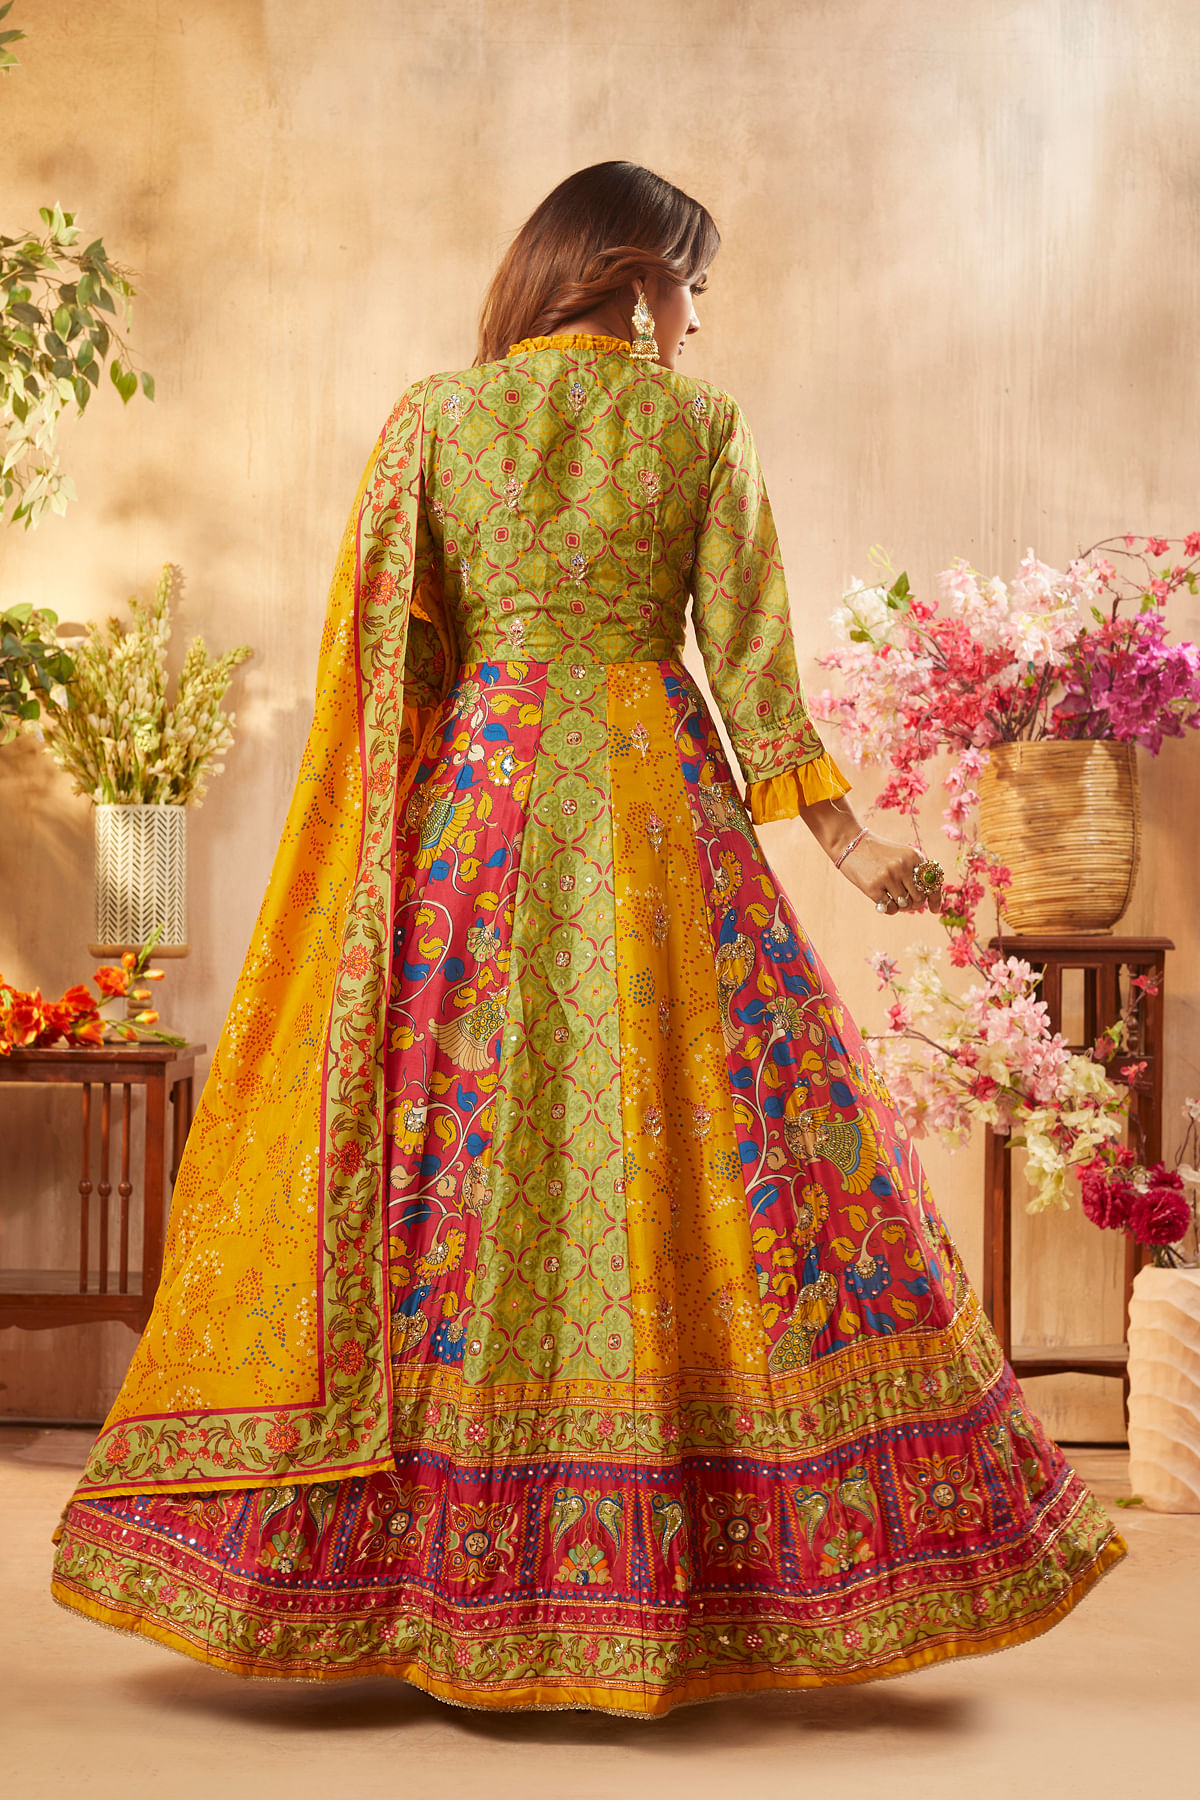 Surabhi Fashion Designer - Churidar Suit Stitching Service in Cross-Cut  Road, Coimbatore. We are offering Perfect Stitching Facilities of All Types  of Woman's Wear like Anarkali Suits, Blouse, Salwar Suits, Lehenga Choli,